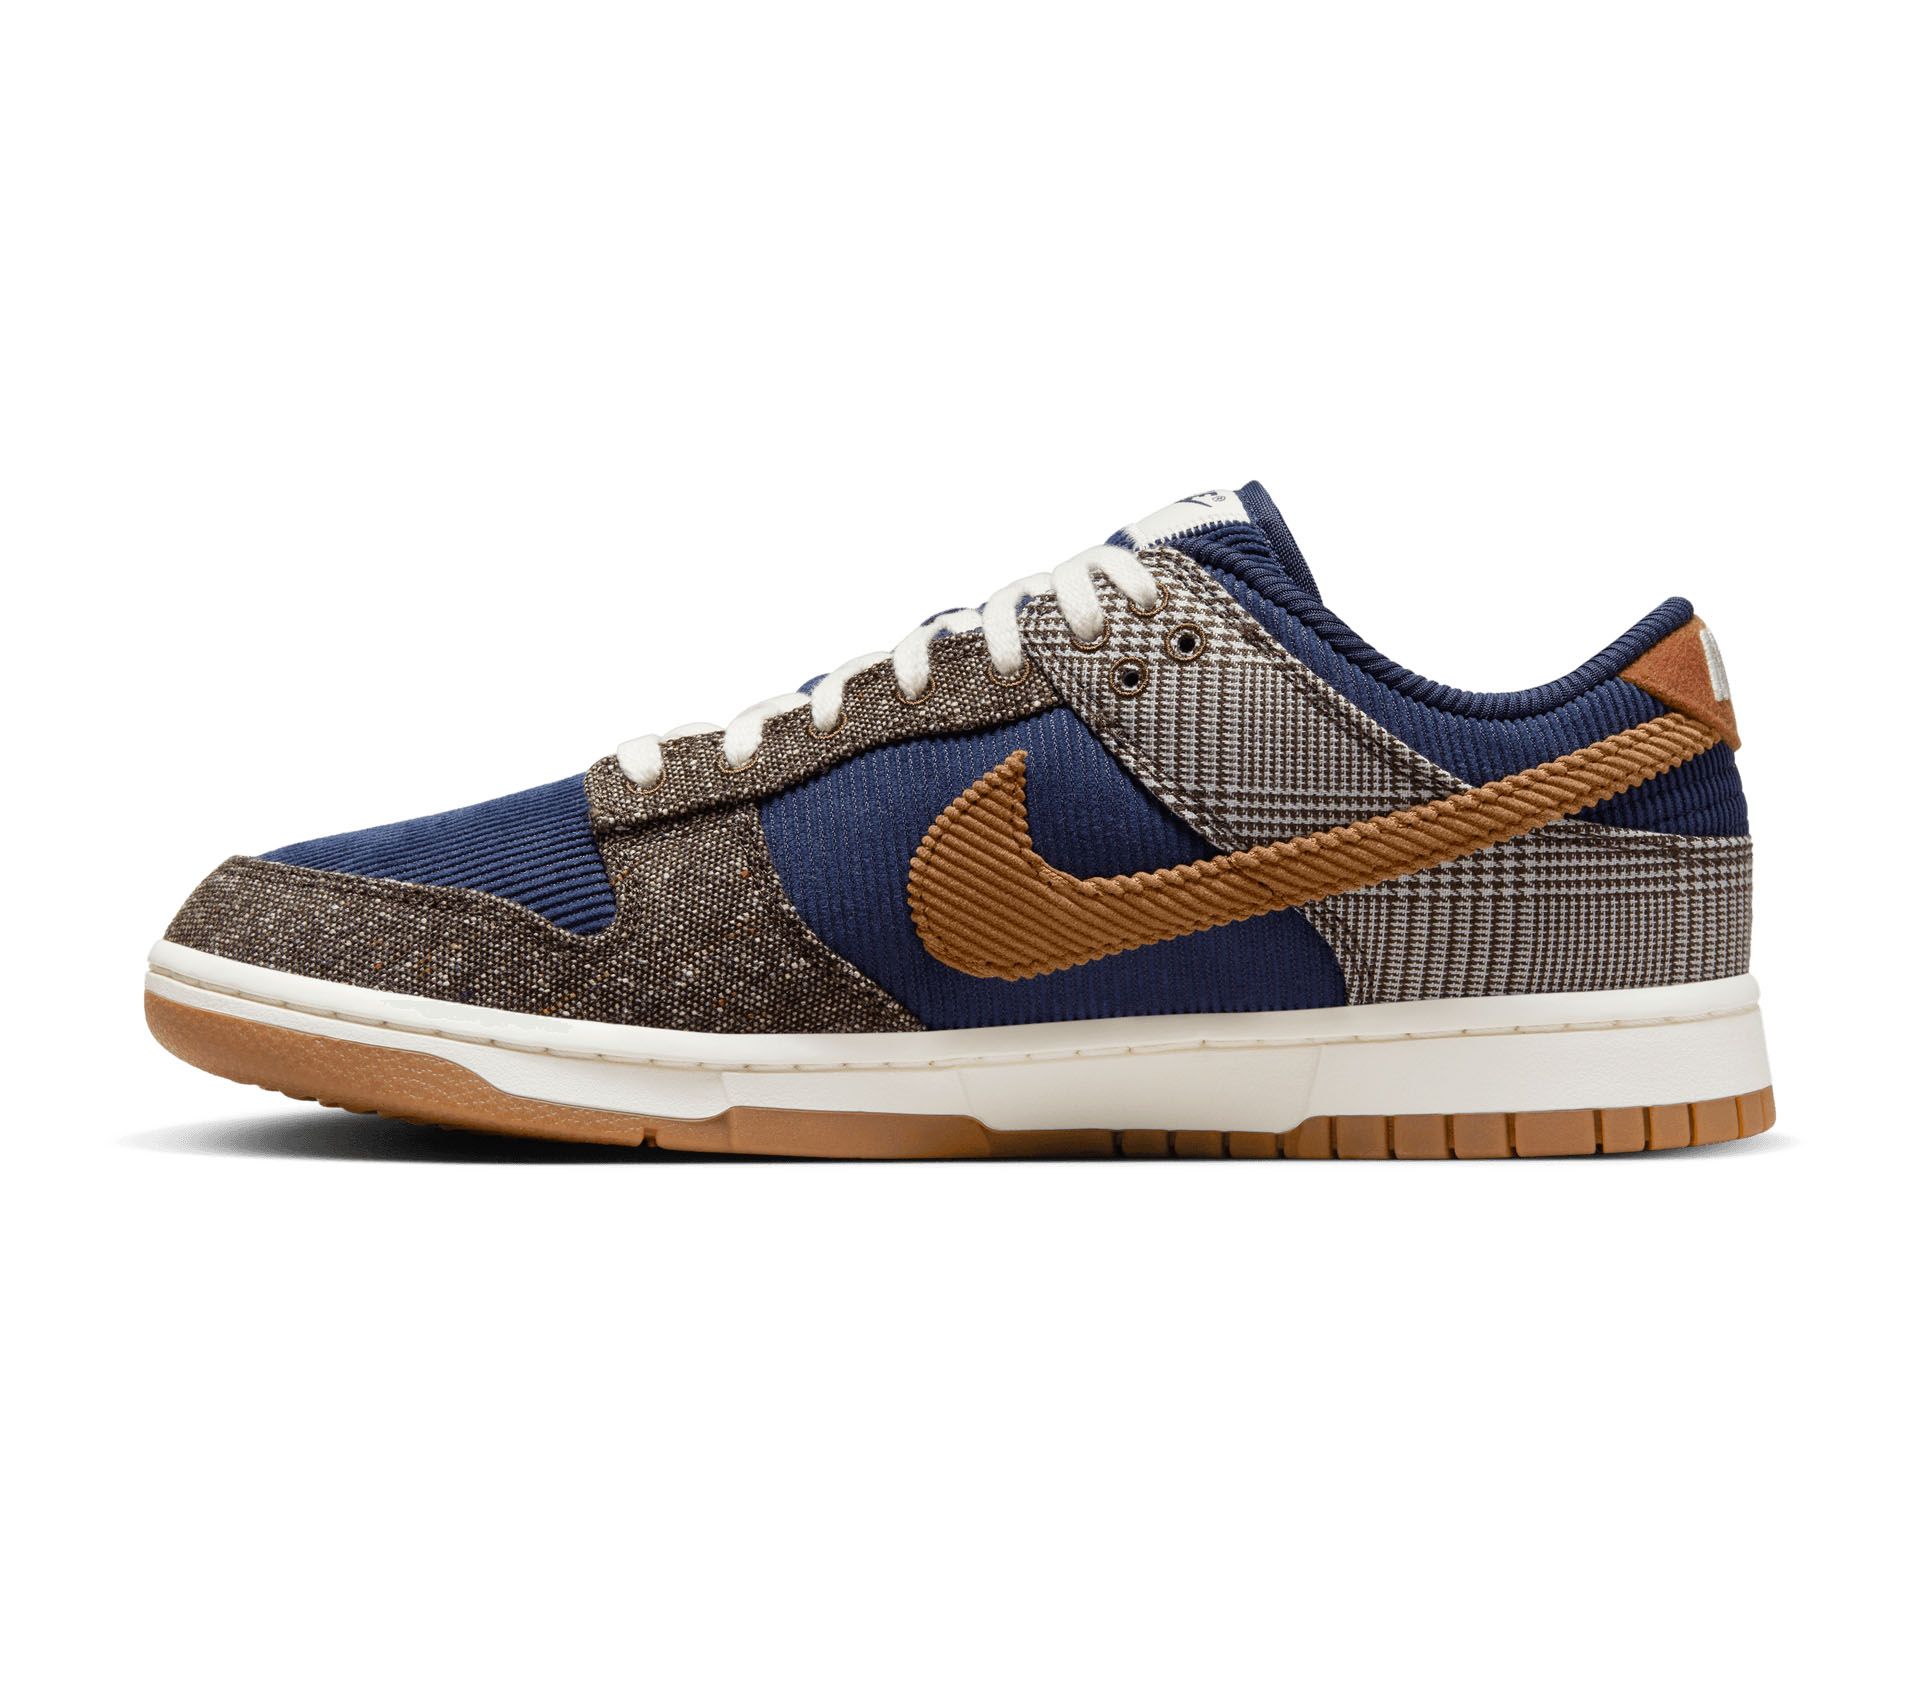 Image #1 of DUNK LOW PRM MIDNIGHT NAVY ALE BROWN